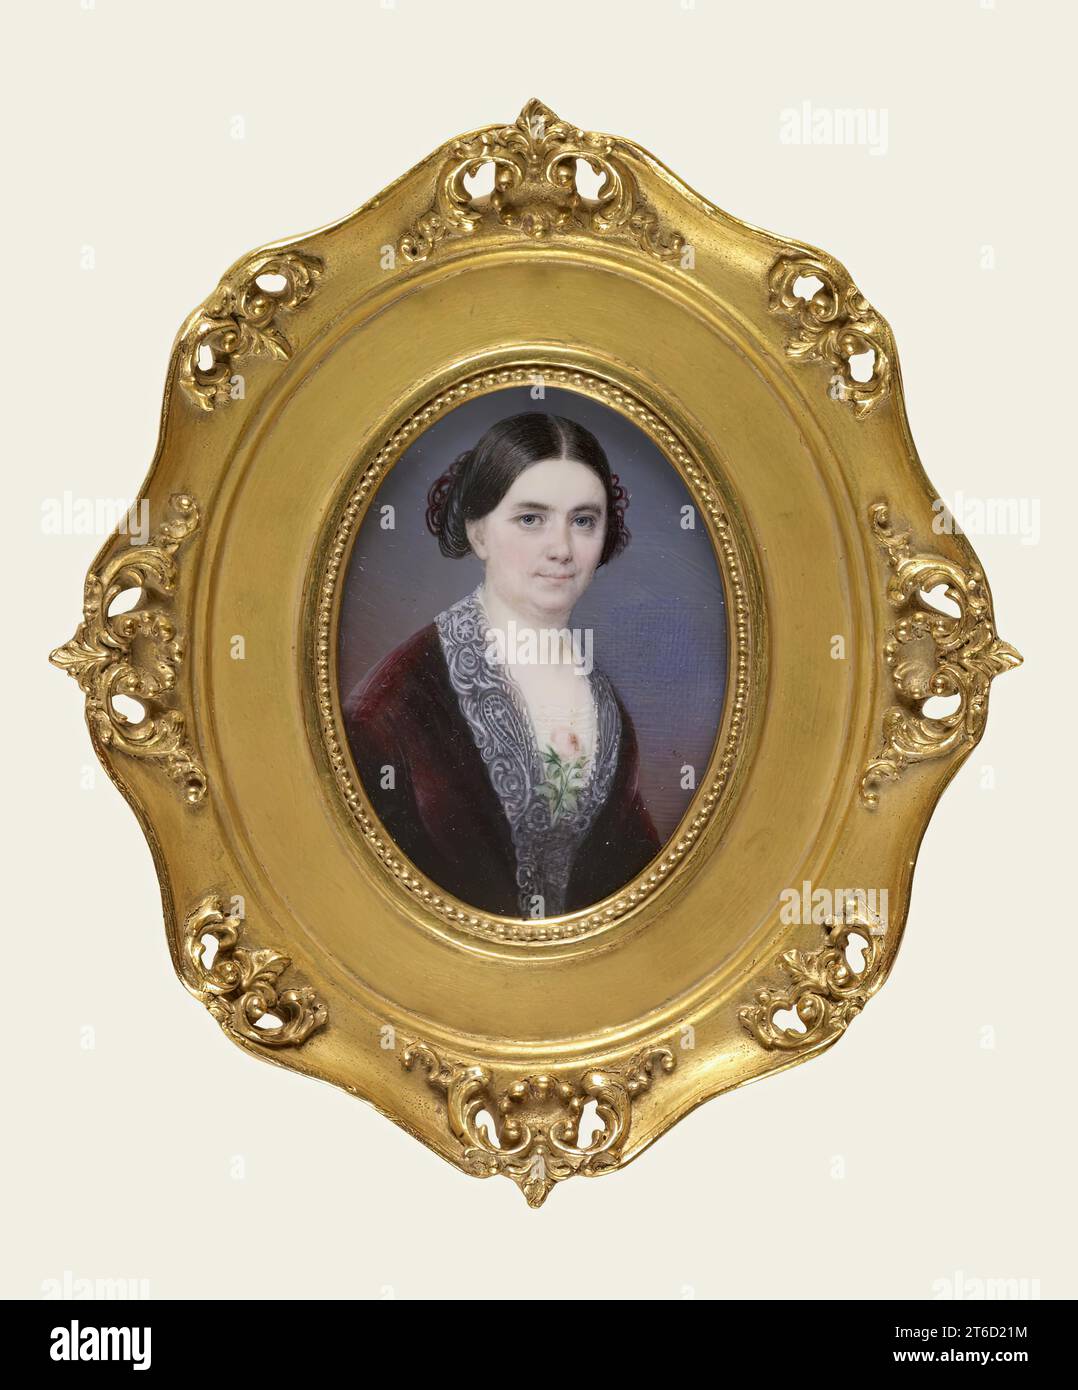 Lady in a red dress, c1850. Waist-length portrait of a woman with smooth black hair, wearing a wine-red velvet dress with low cut lace yoke. This miniature reputedly was taken from the pocket of a dead officer on a Southern battlefield of the Civil War. Stock Photo